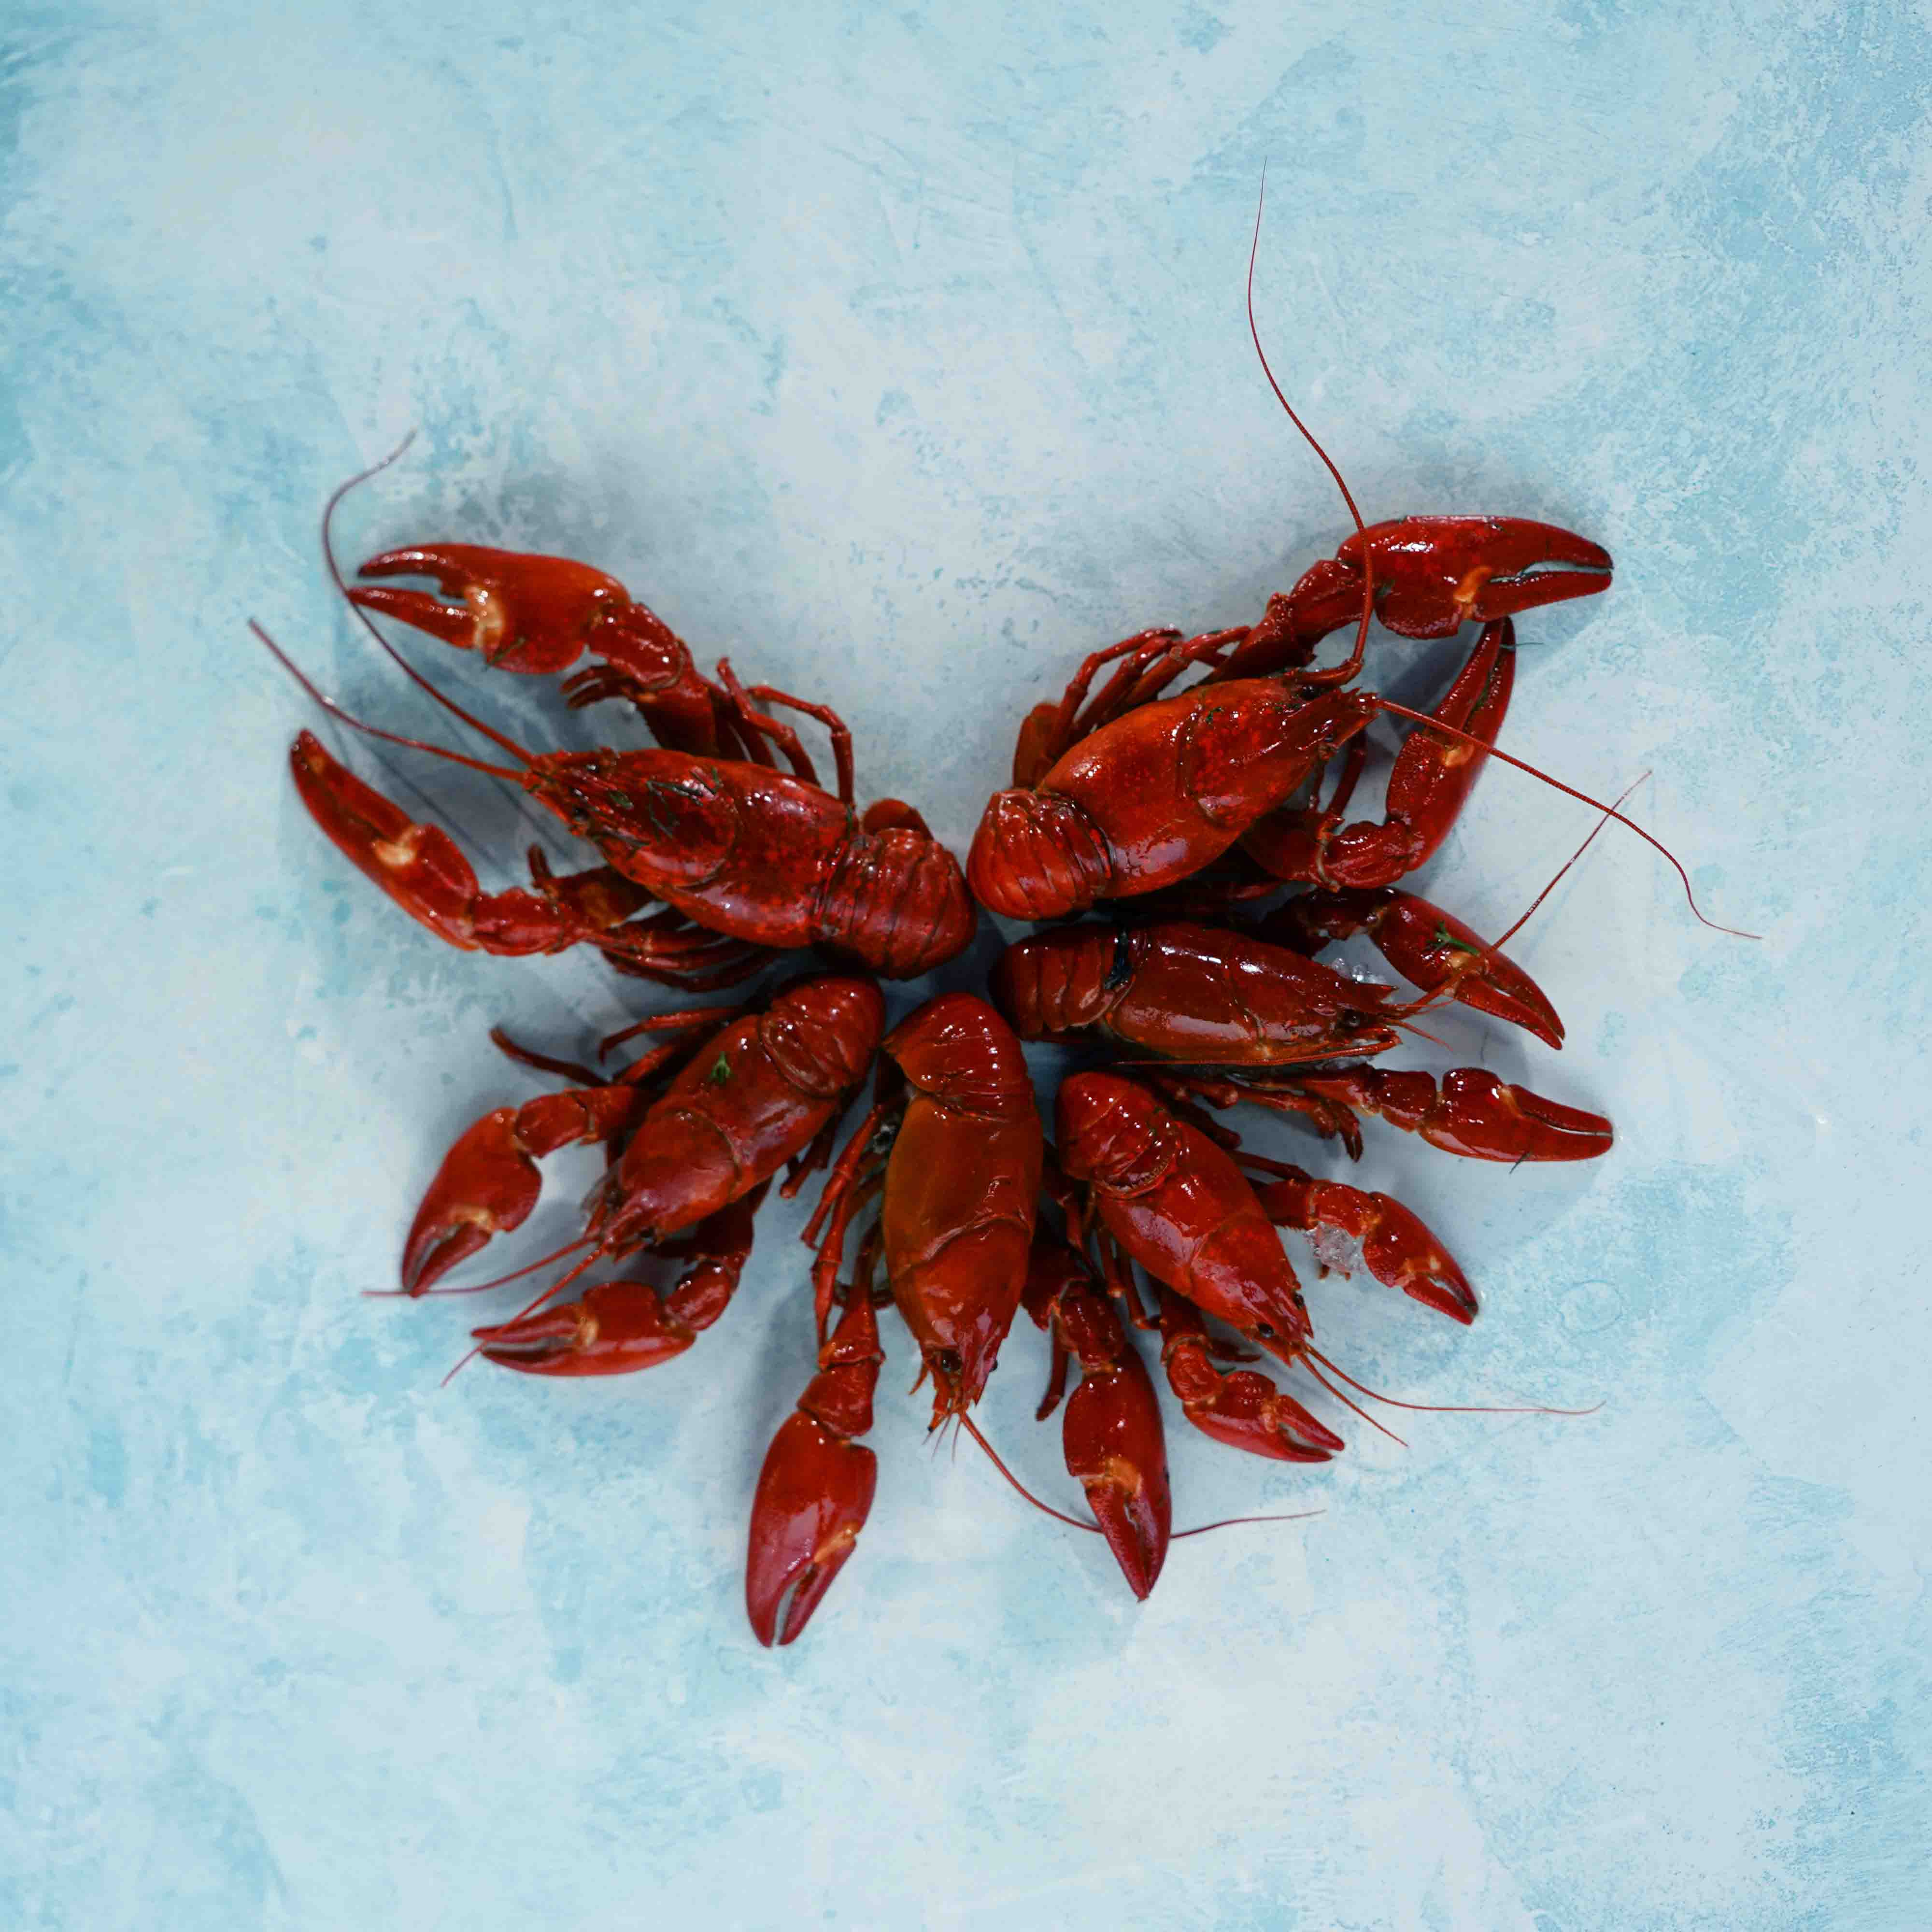 Buy Whole Crayfish Online  Next Day Delivery – The Fish Society